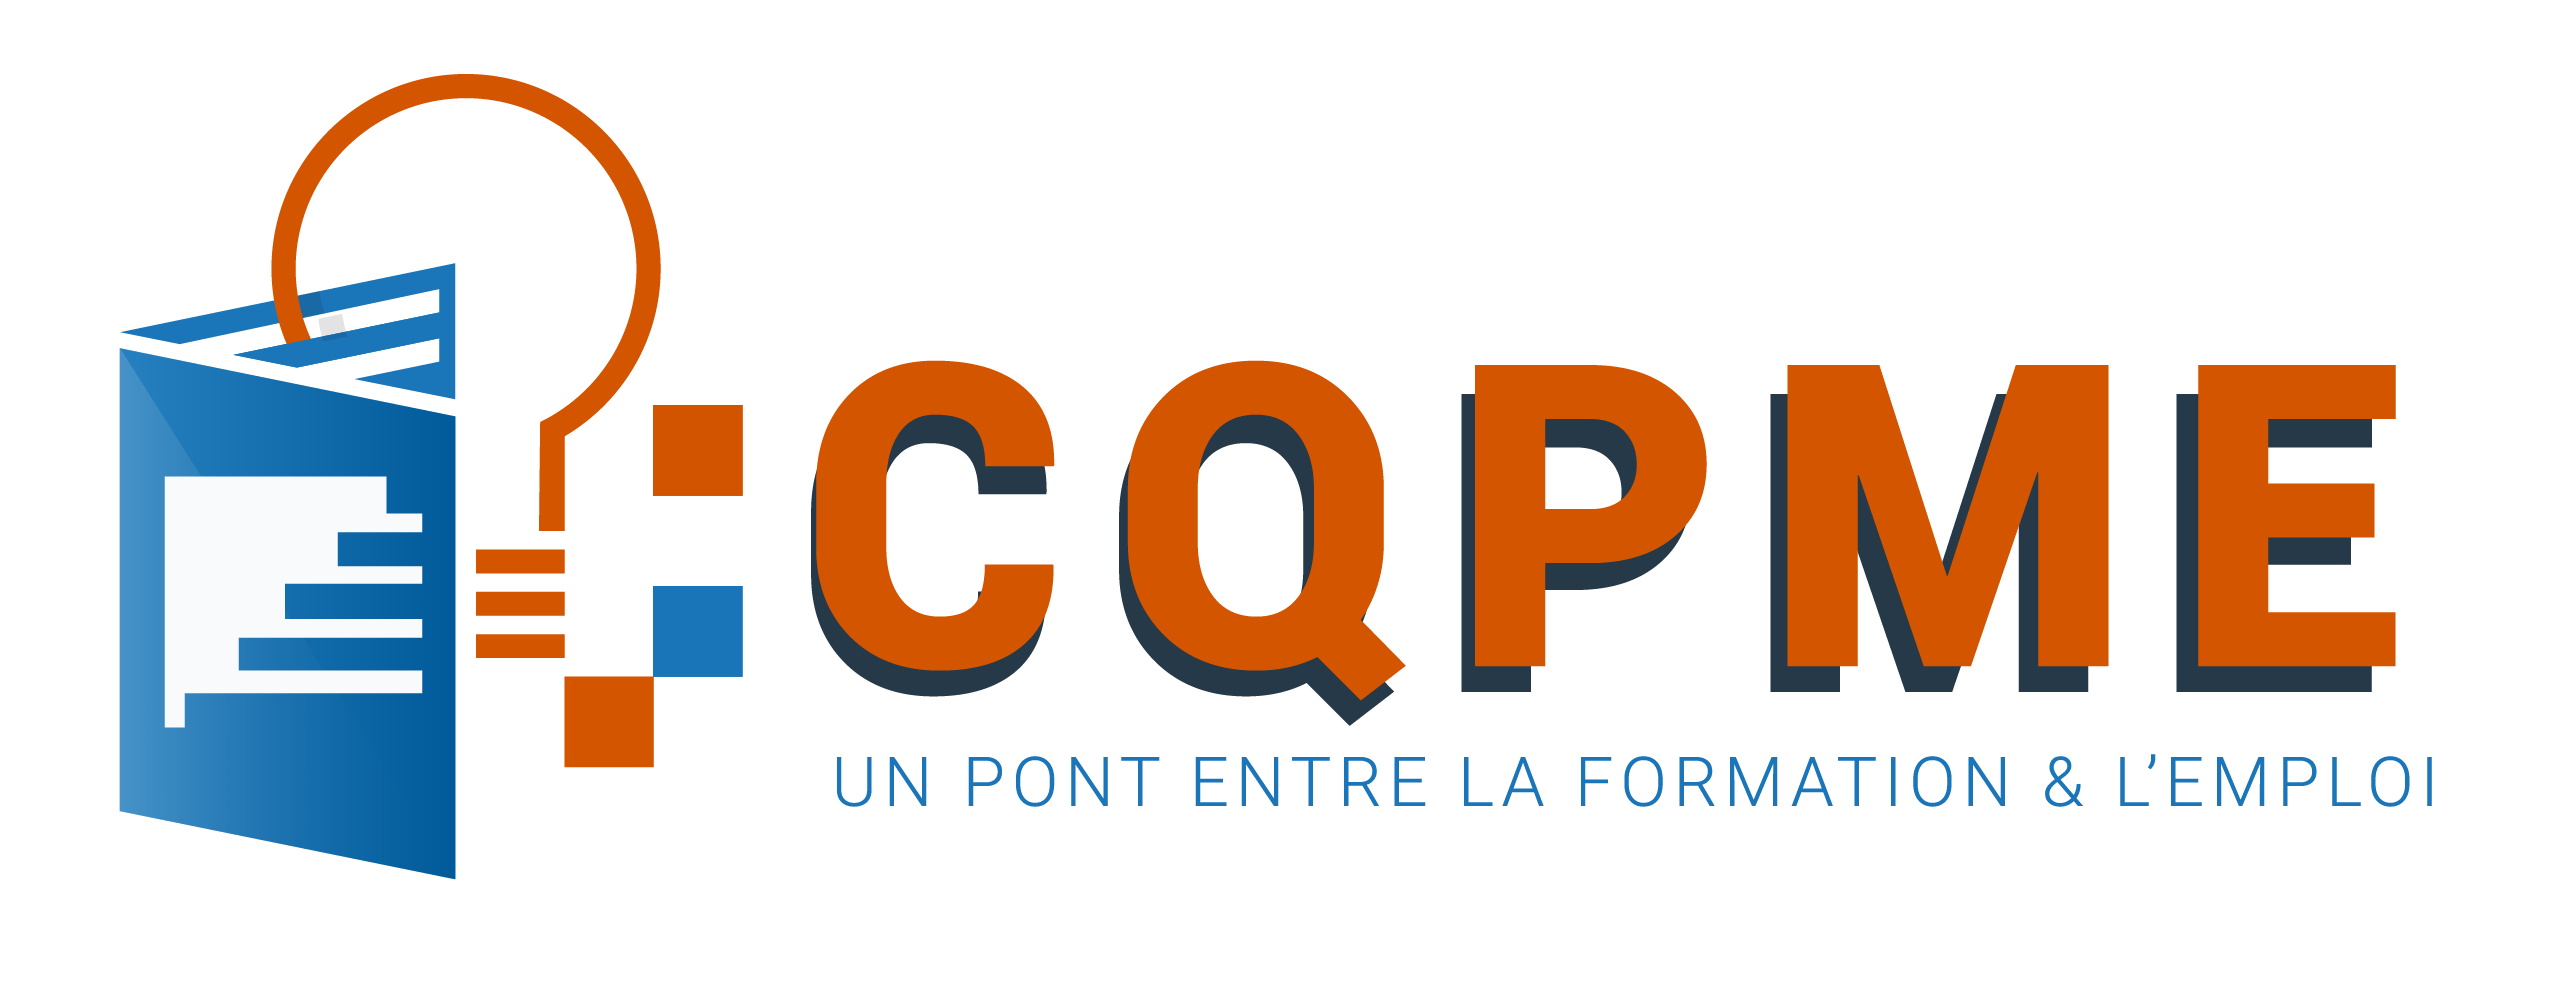 :::- CIFAFRIQUE - CONSEIL INFORMATION FORMATION